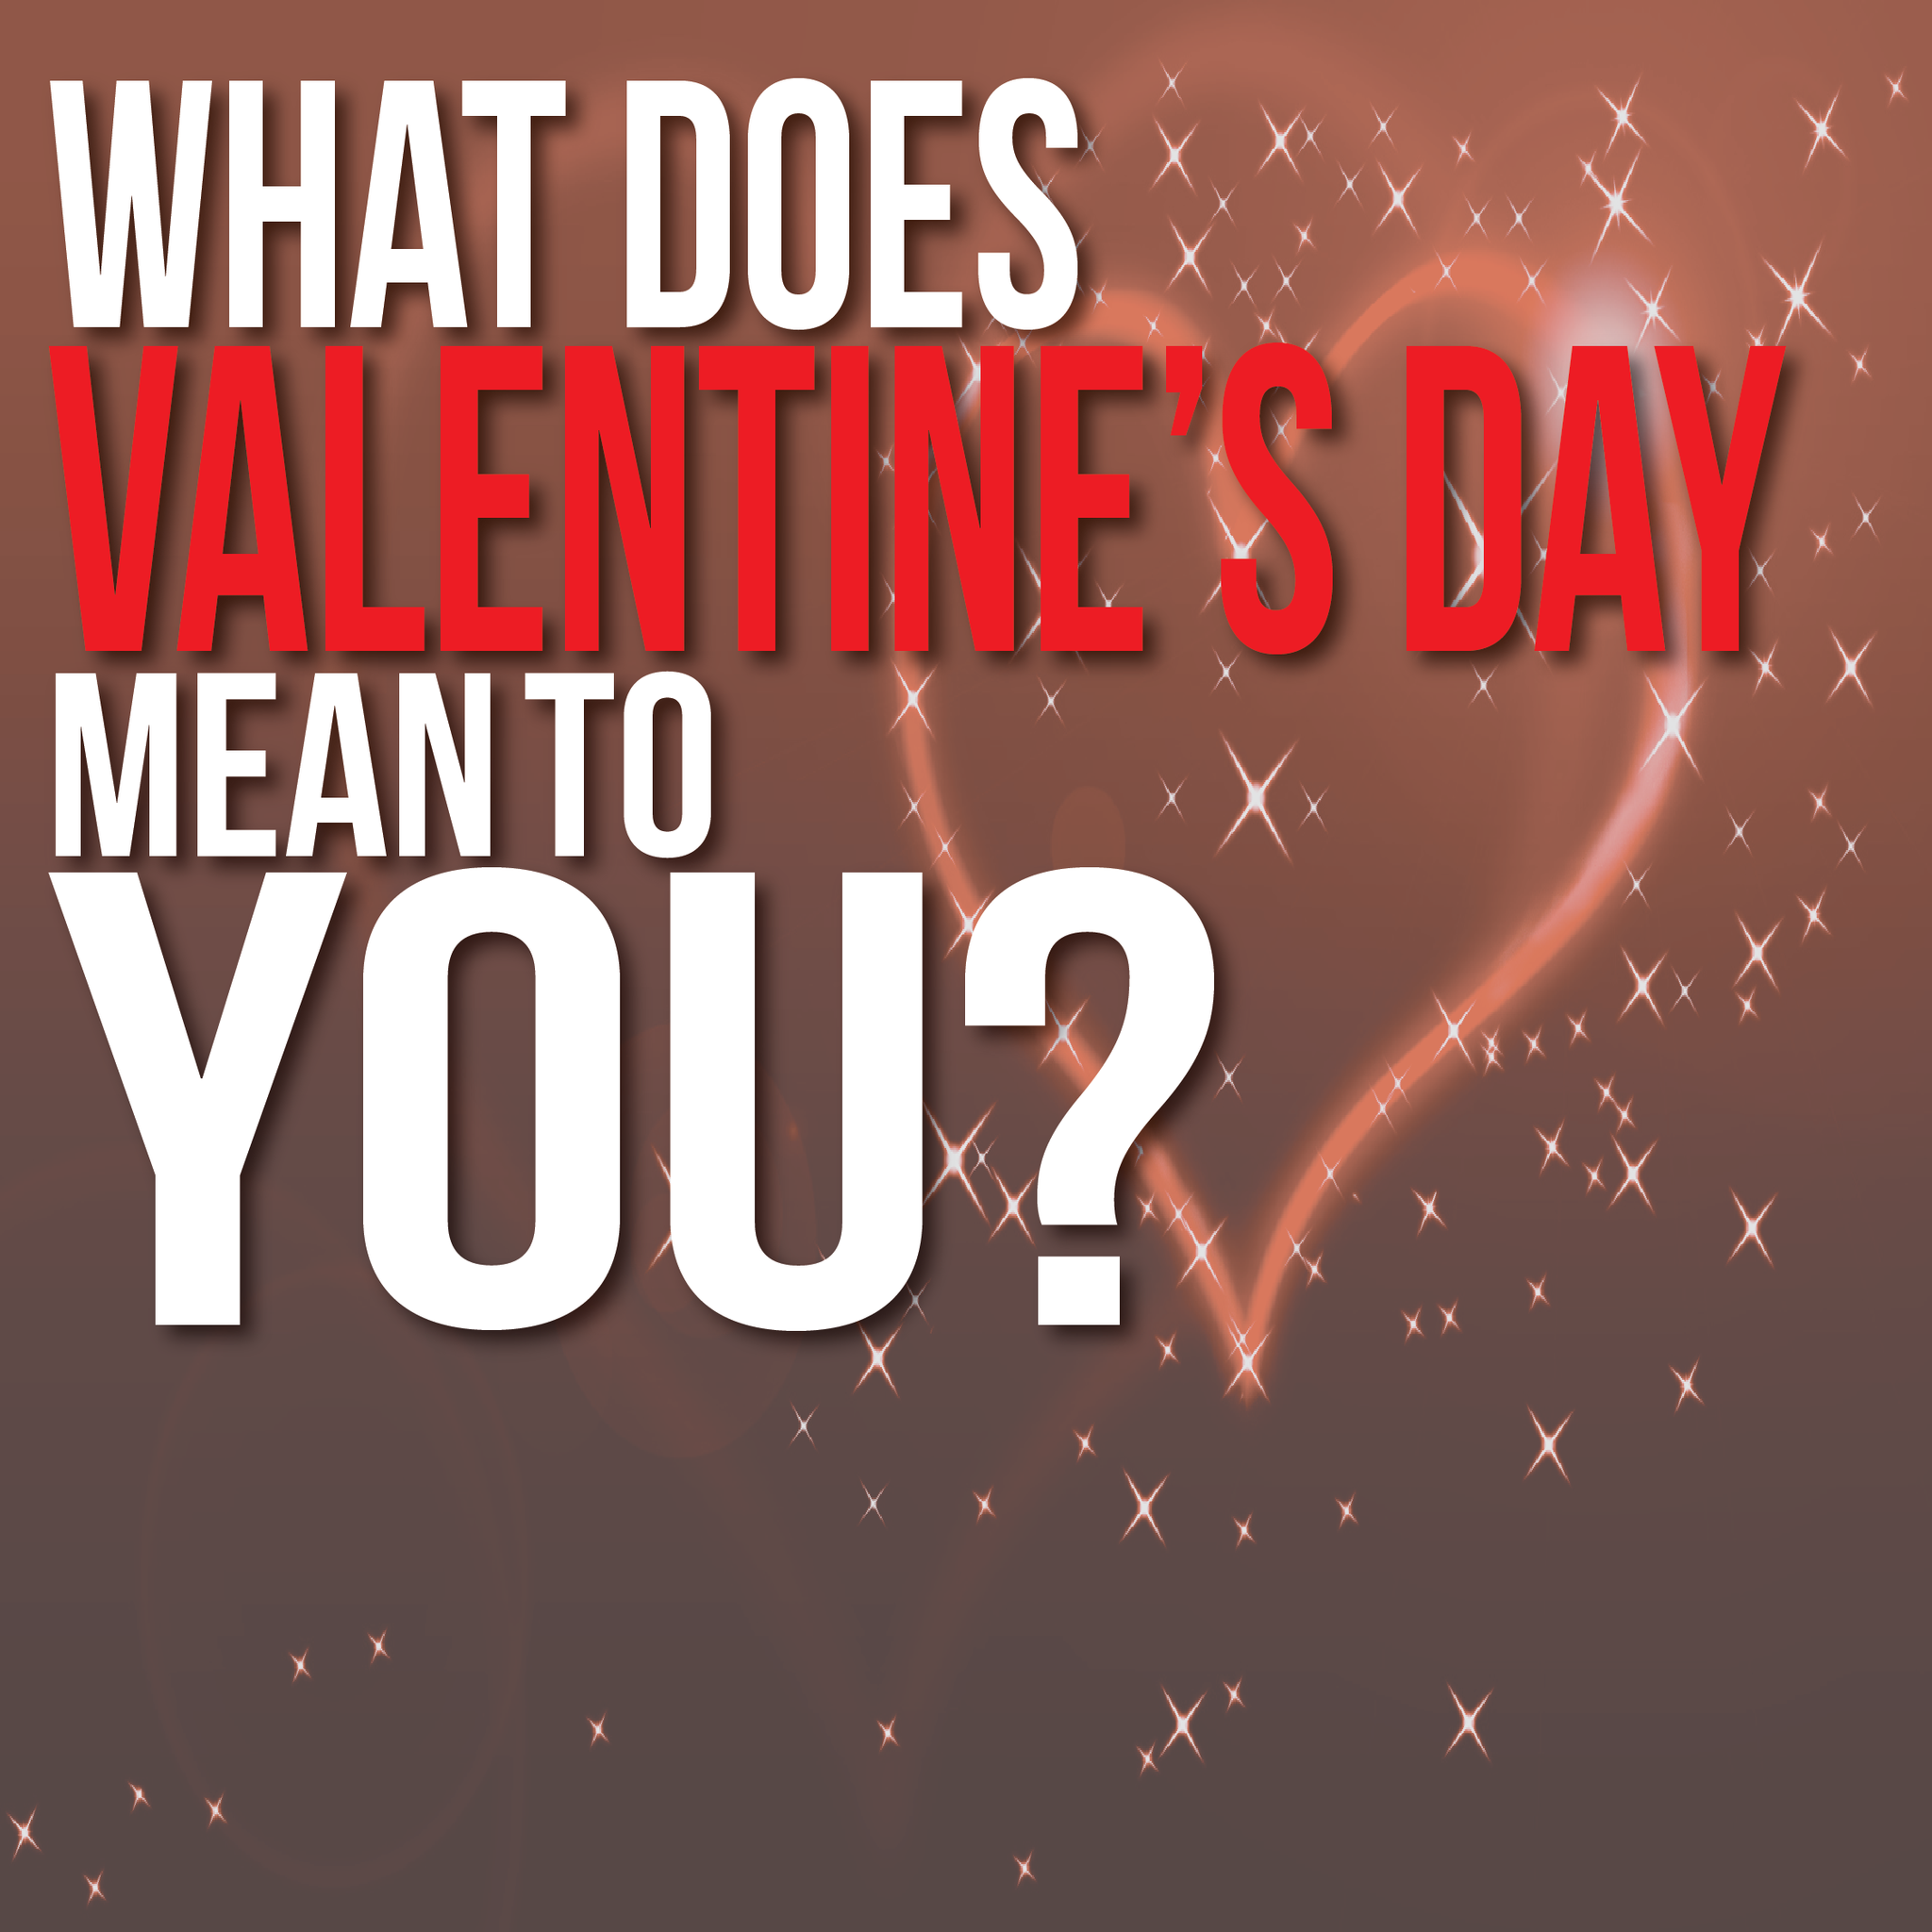 What Does Valentine's Day Mean To You?